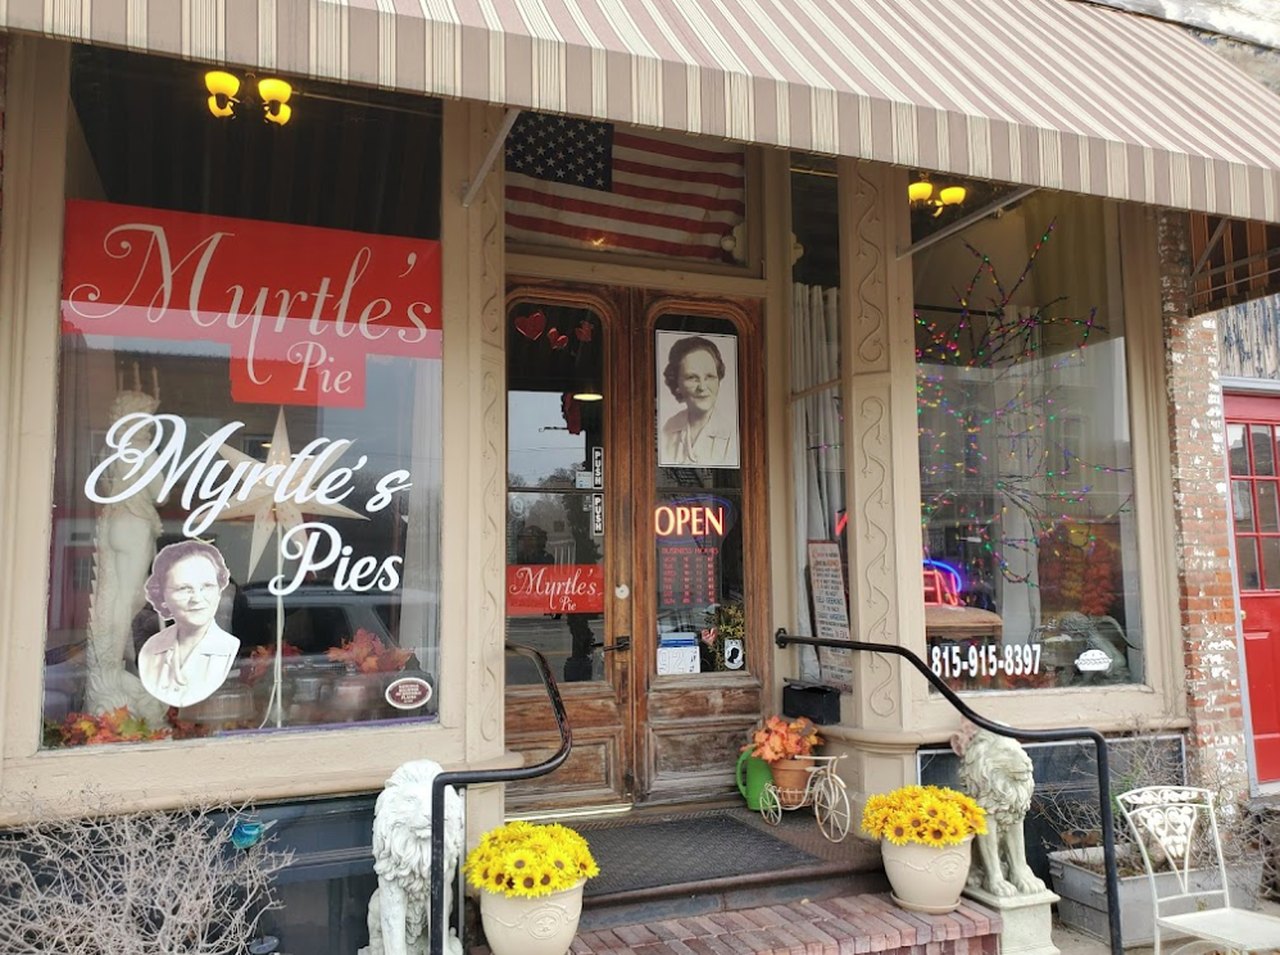   
																It’s Worth It To Drive Across Illinois Just For The Fresh Pies At Myrtle’s Pie Shop 
															 